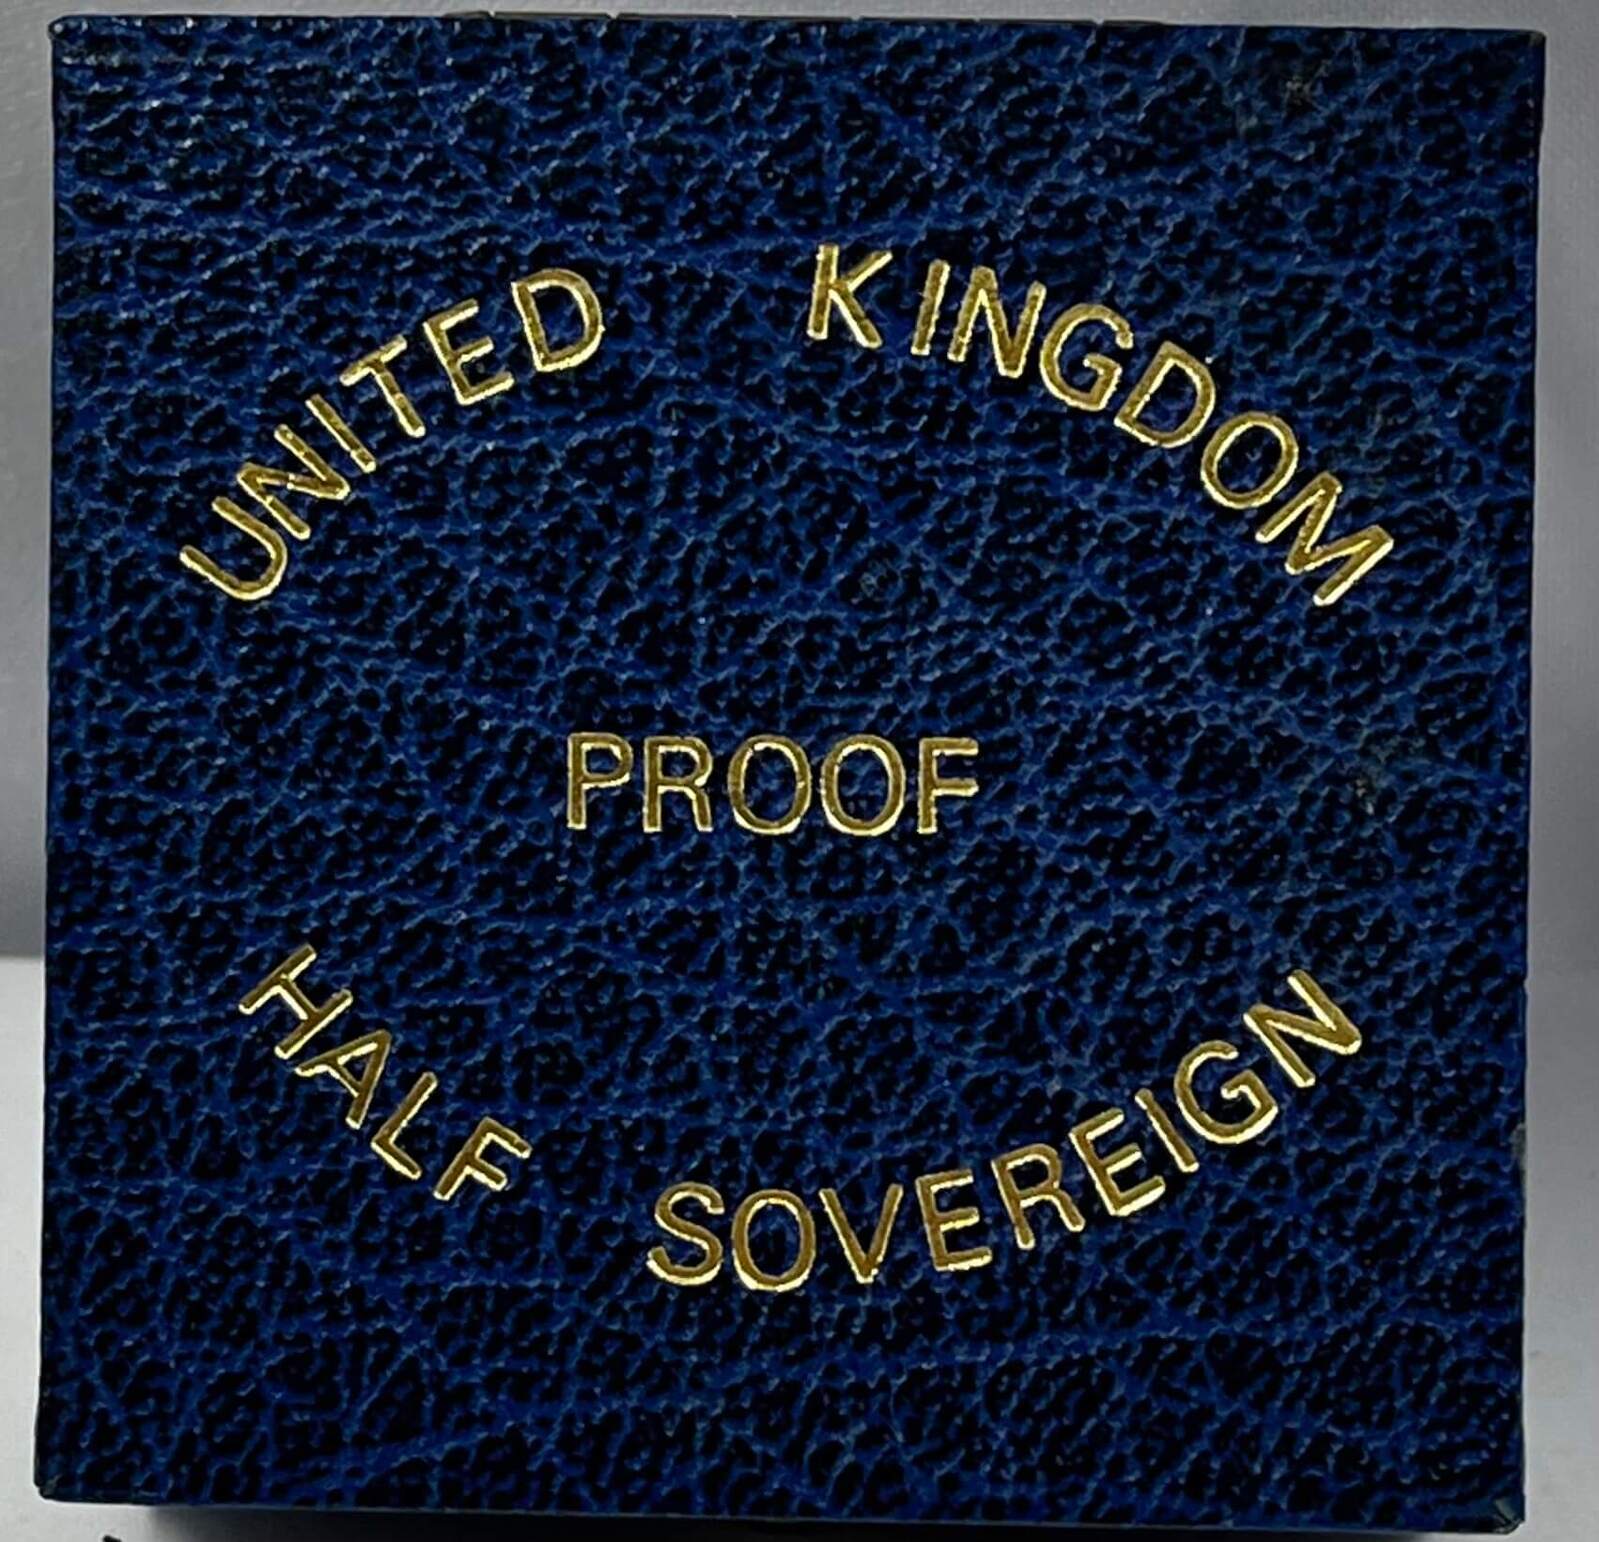 United Kingdom 1984 Half Sovereign Proof in Case product image